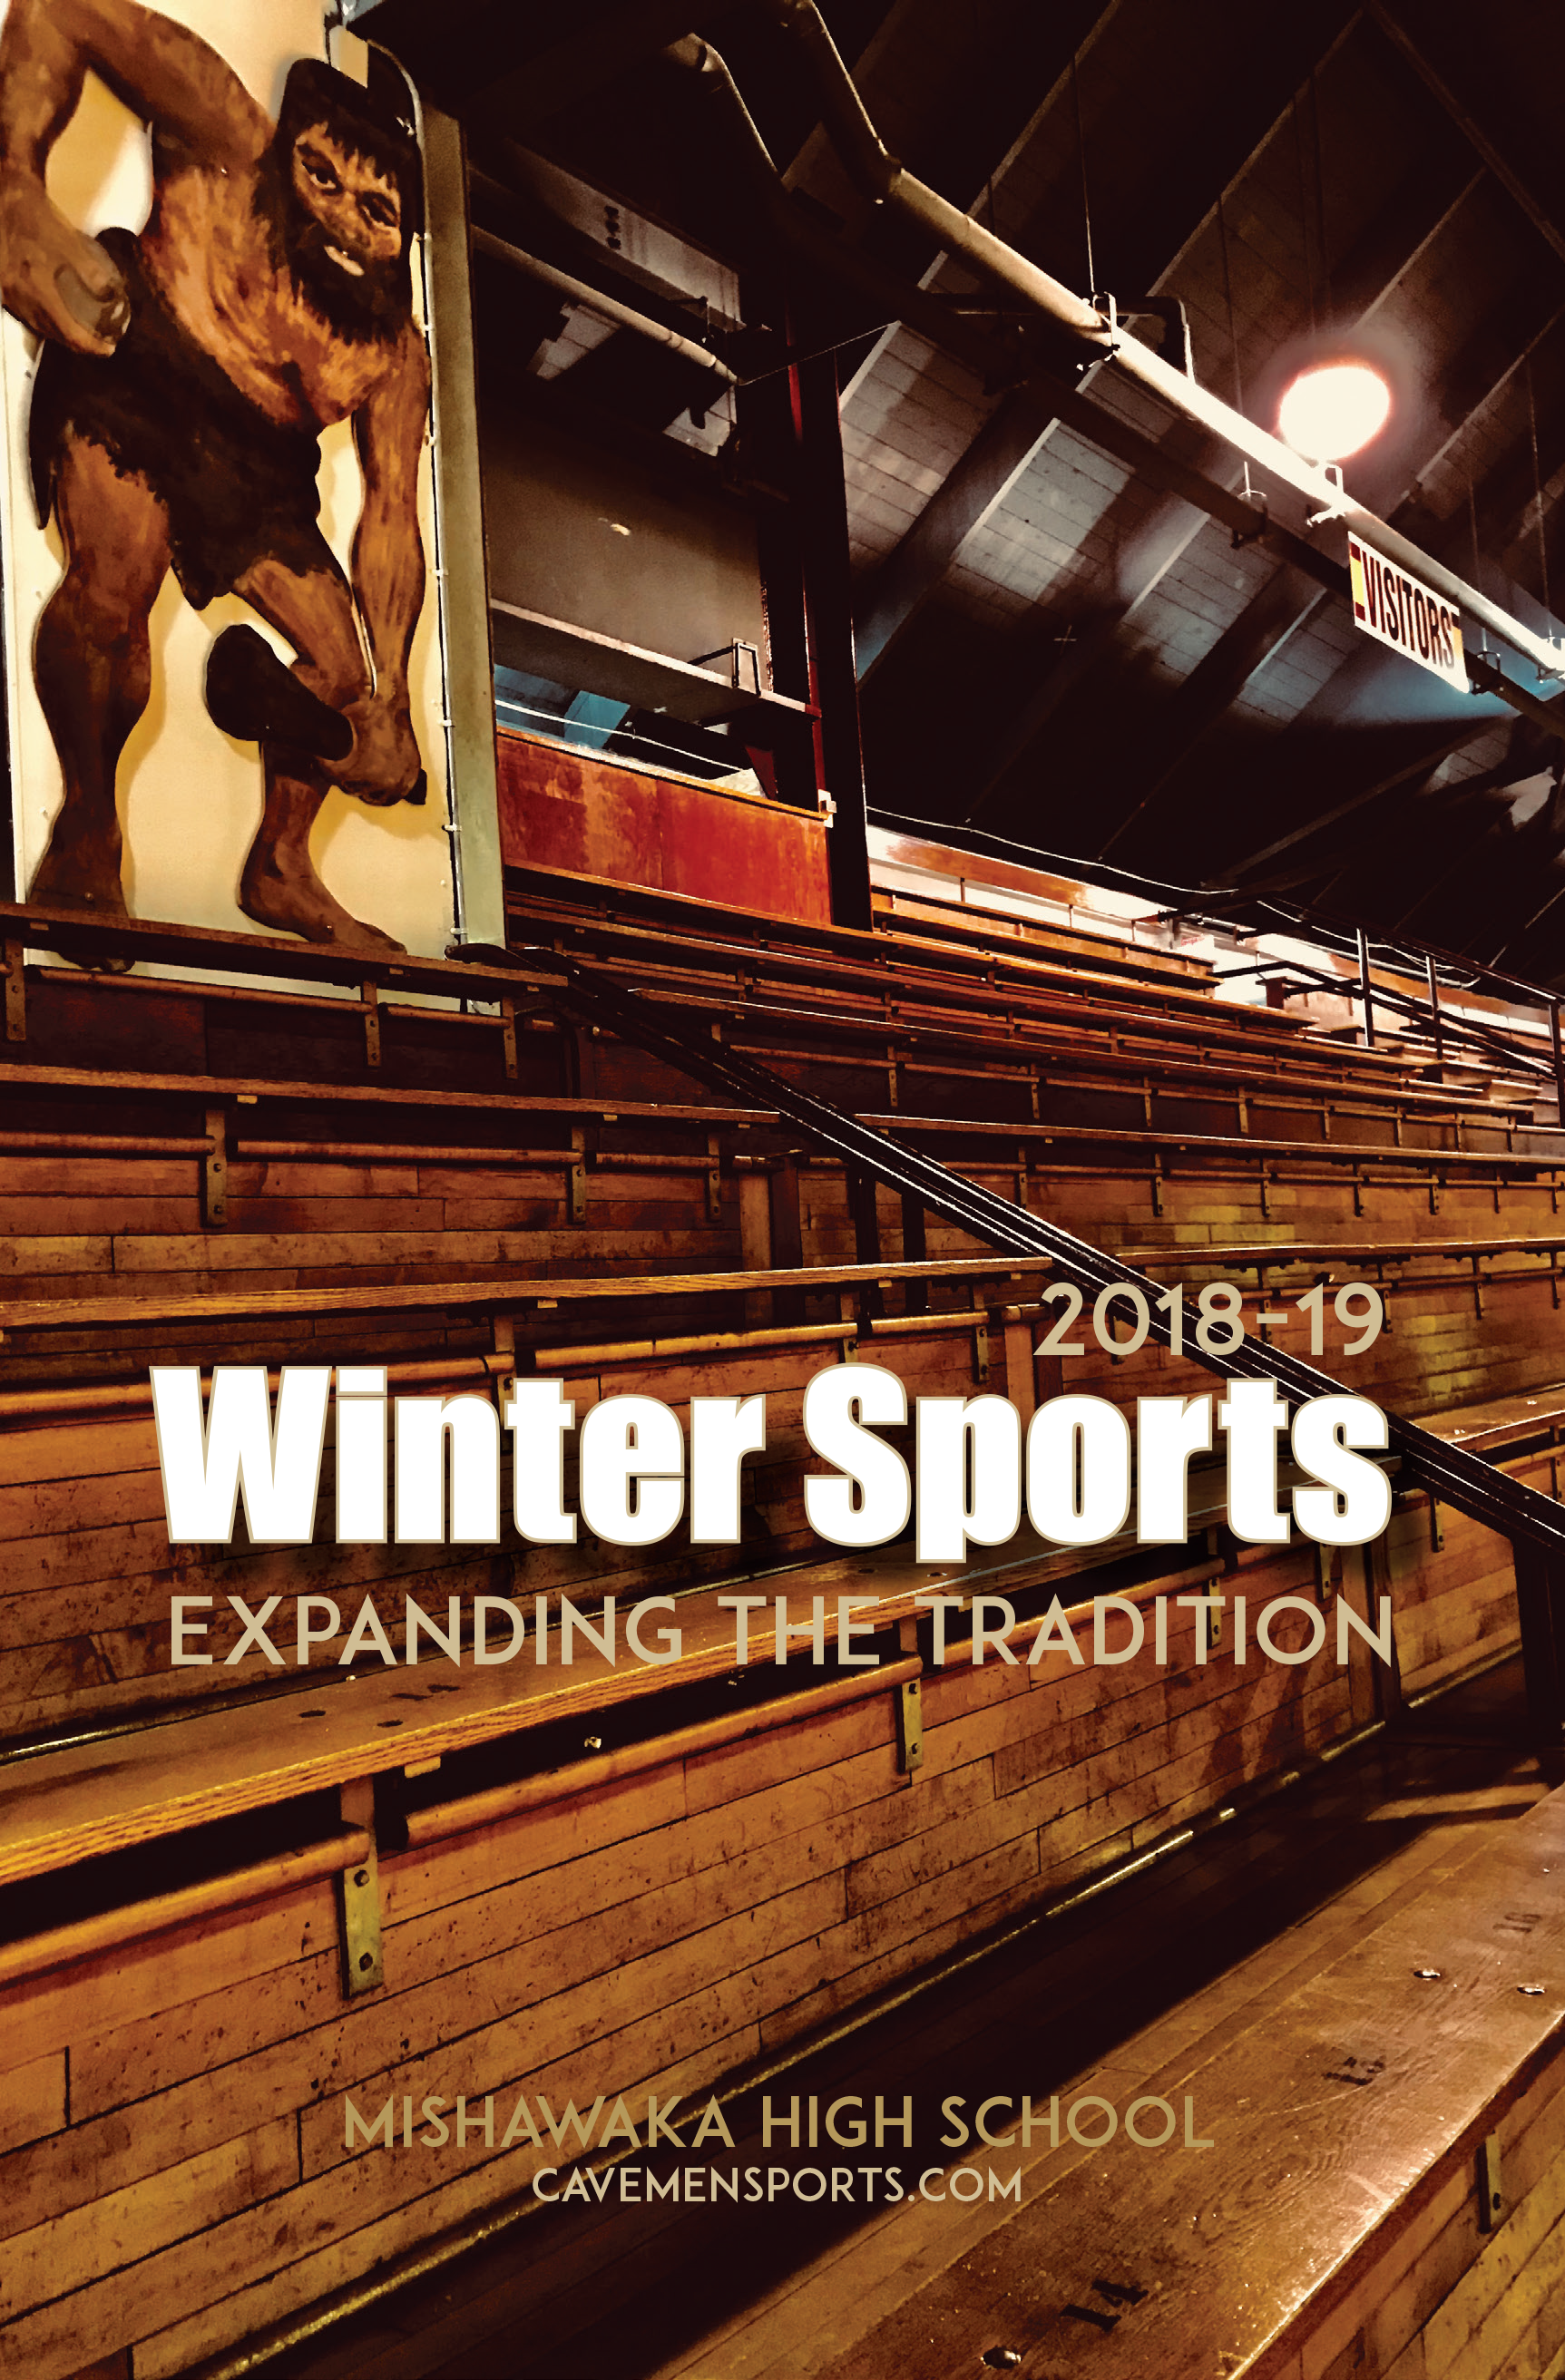 Winter sports cover 